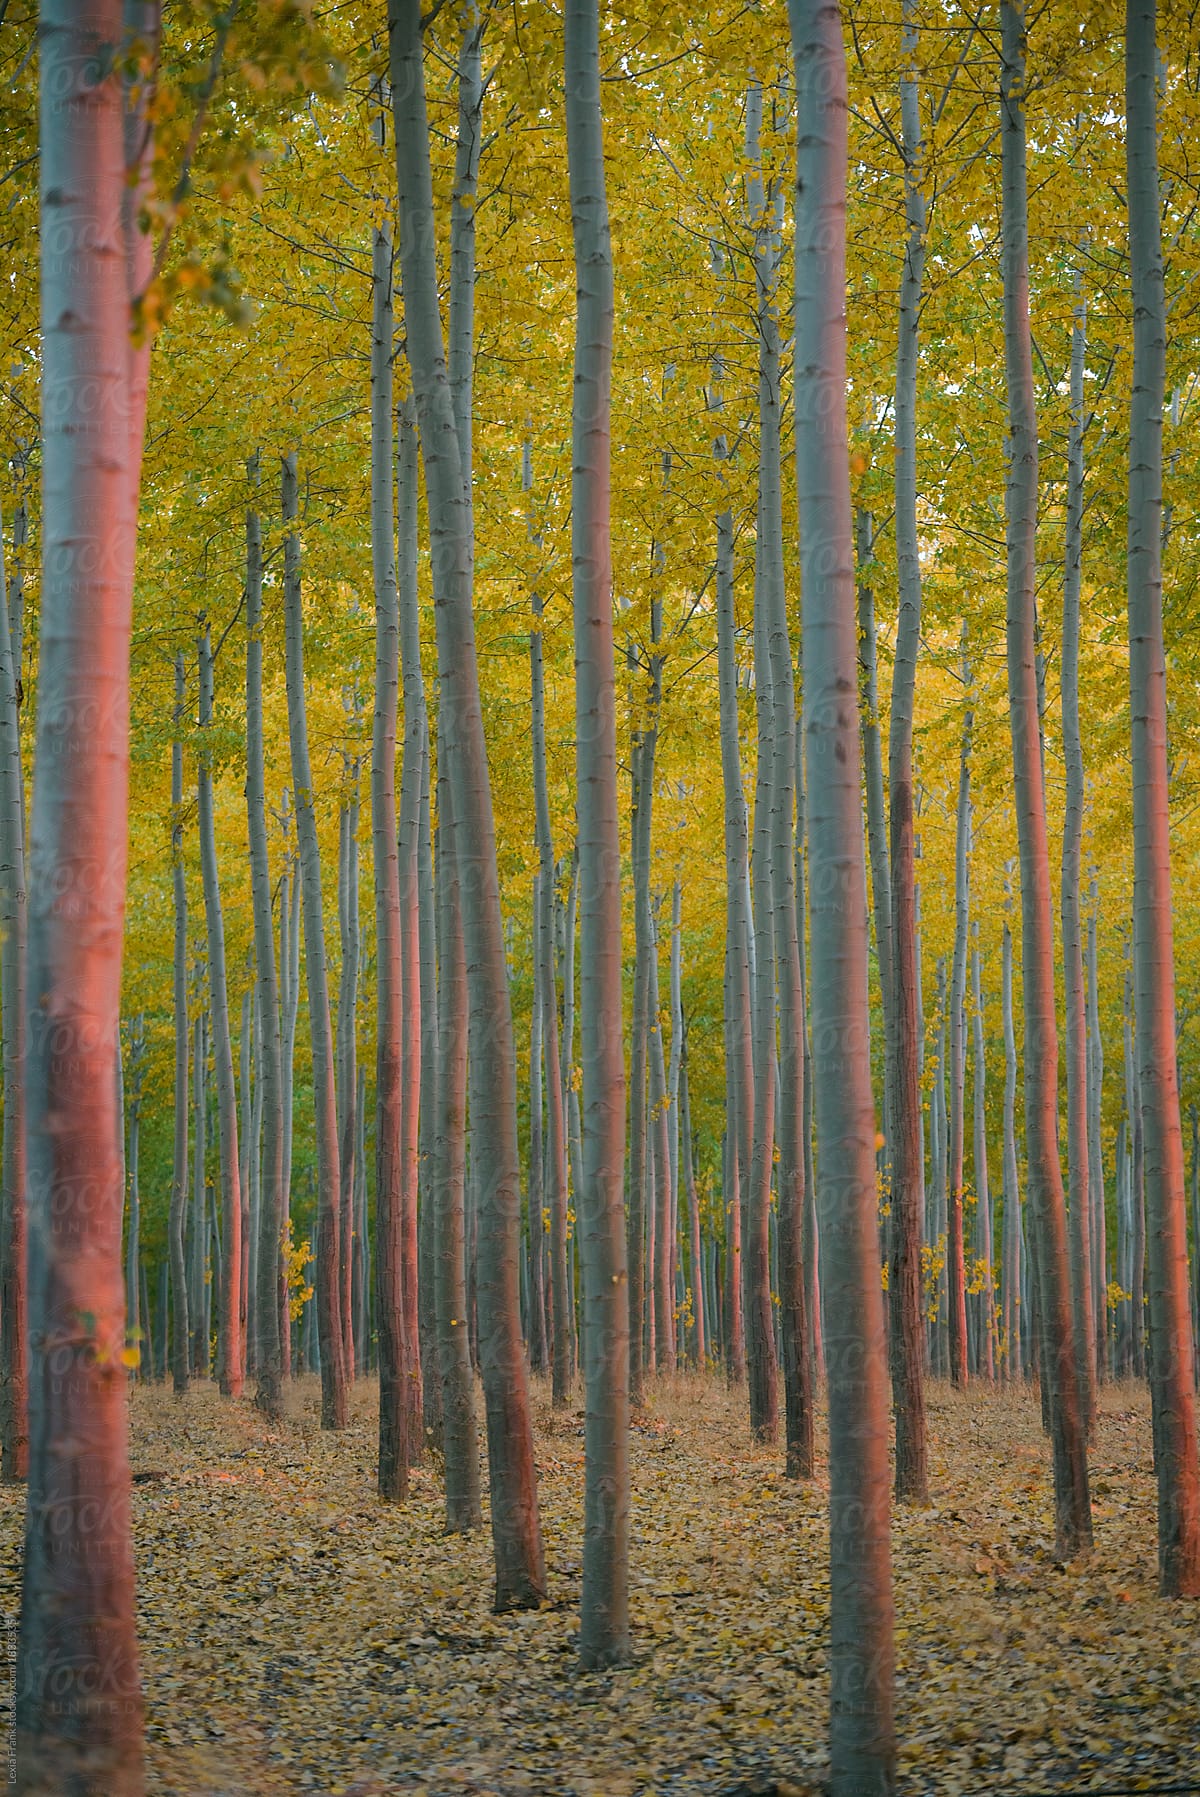 grove of identical poplar trees in the fall with vibrant colors